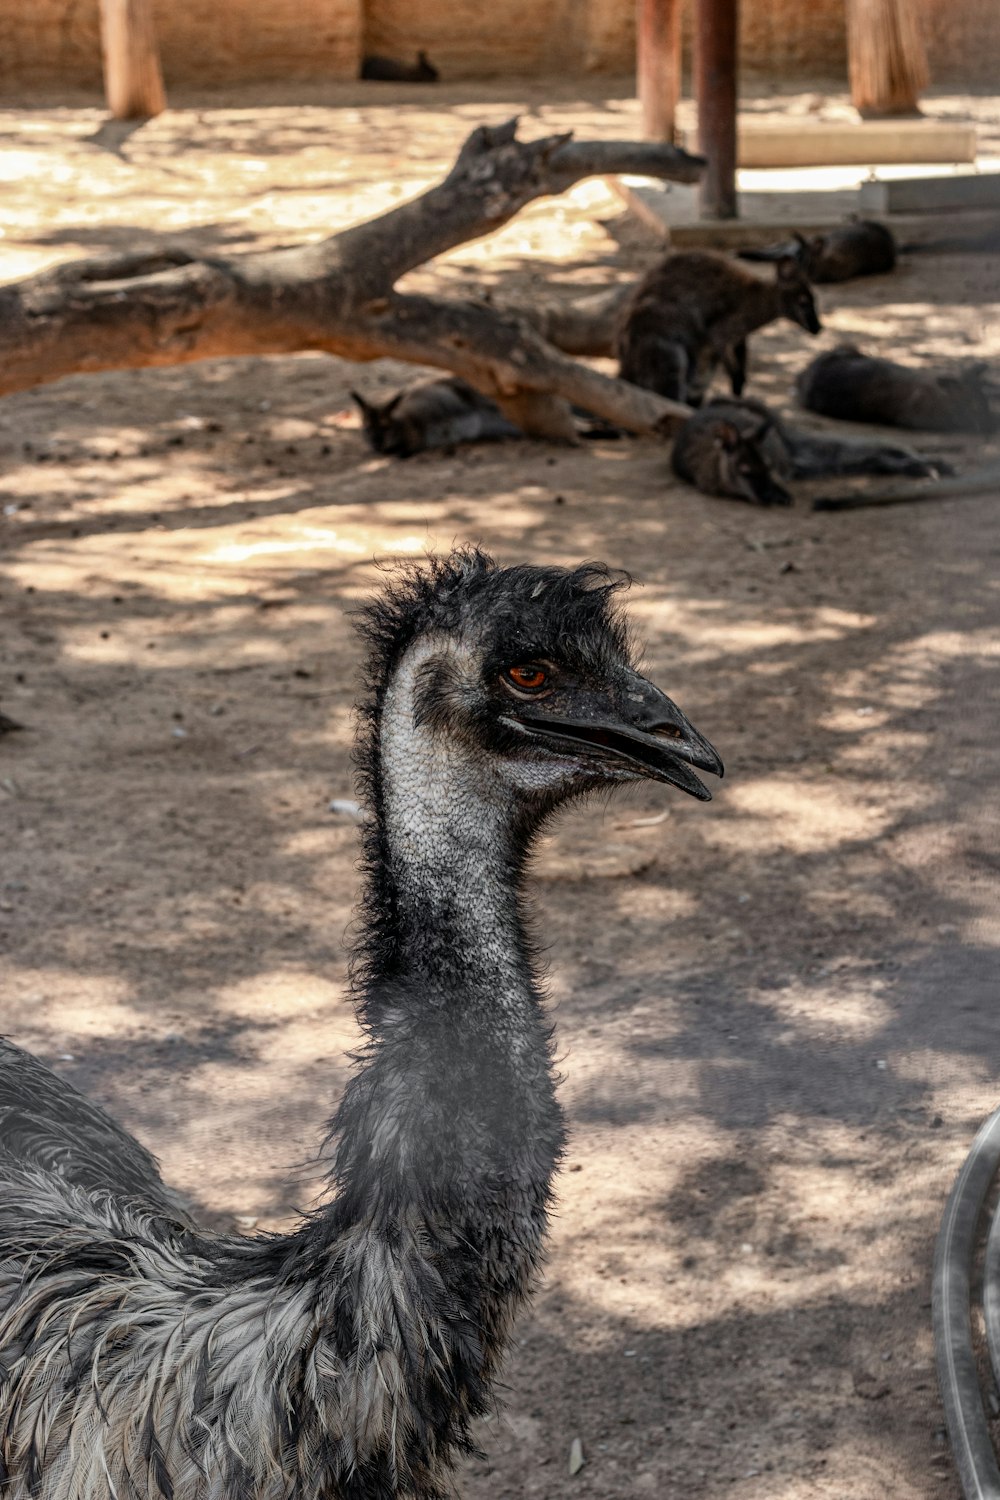 an ostrich standing in a dirt area next to a tree